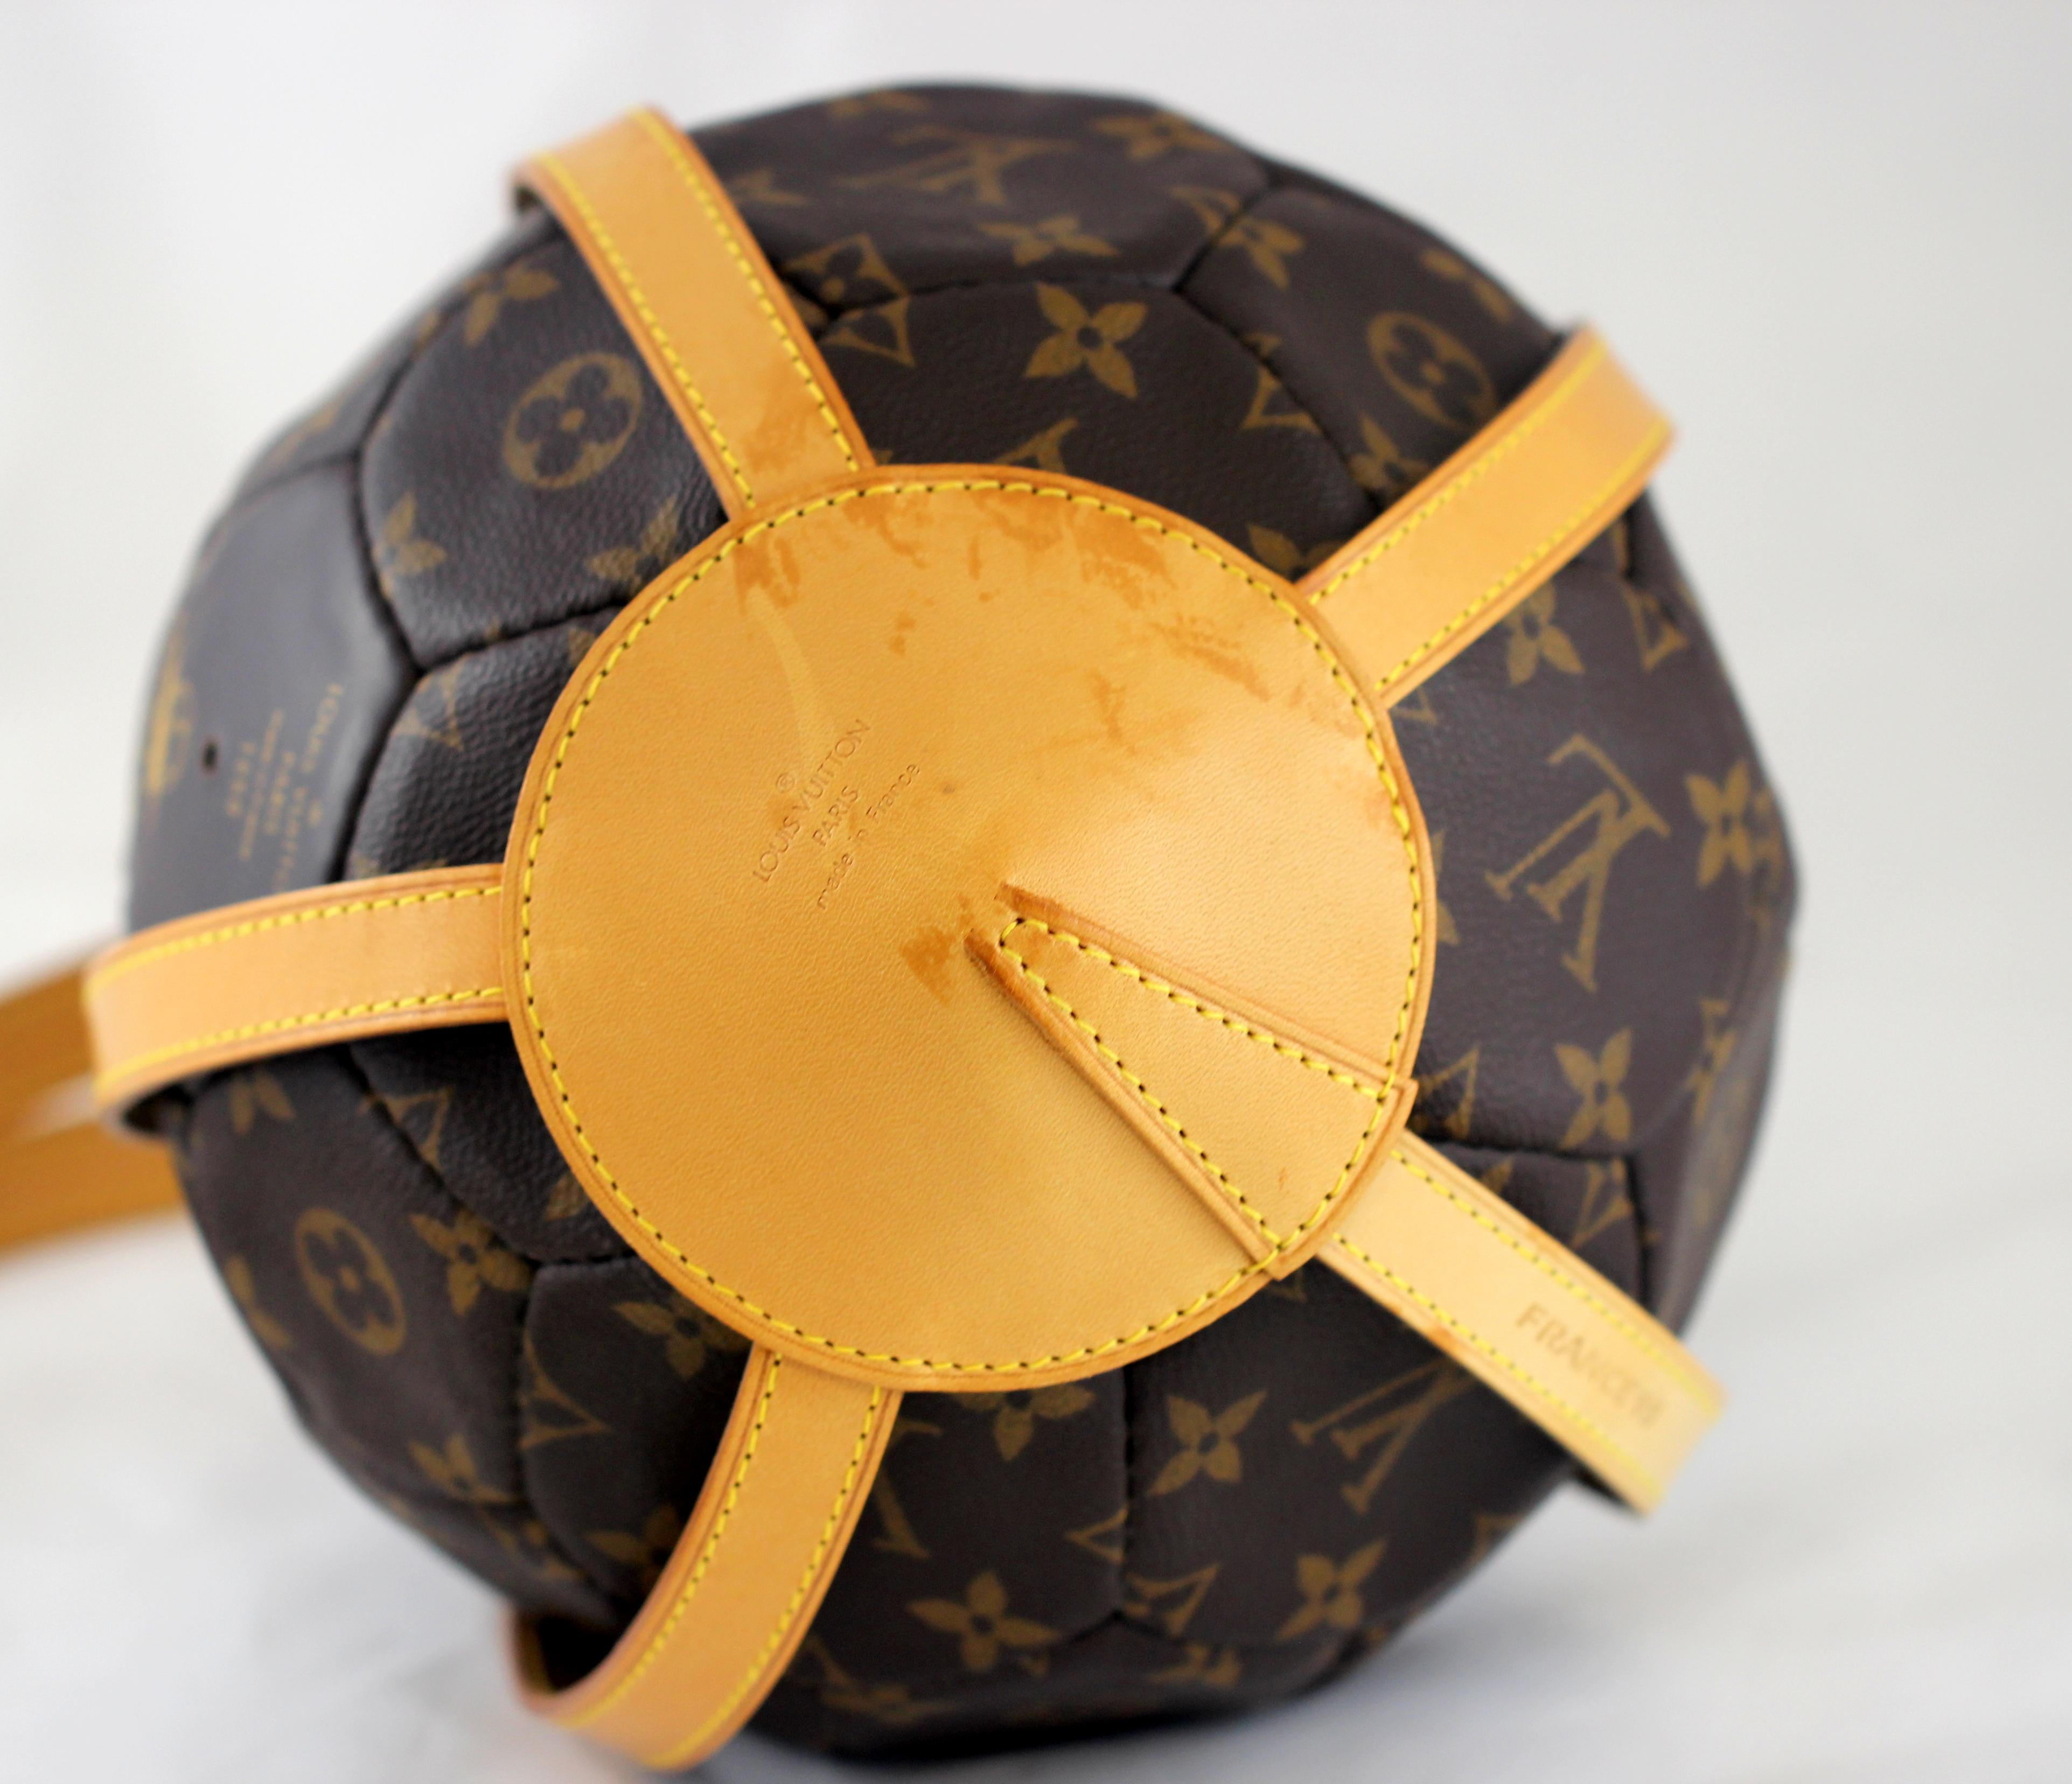 Vintage football/soccer ball
Manufactured by Louis Vuitton for World Cup of 1998 in France.
Limited and numbered edition Nr. 1650.

Made from monogram cow skin leather, net designed with natural leather bands for carrying.

Made by Luis